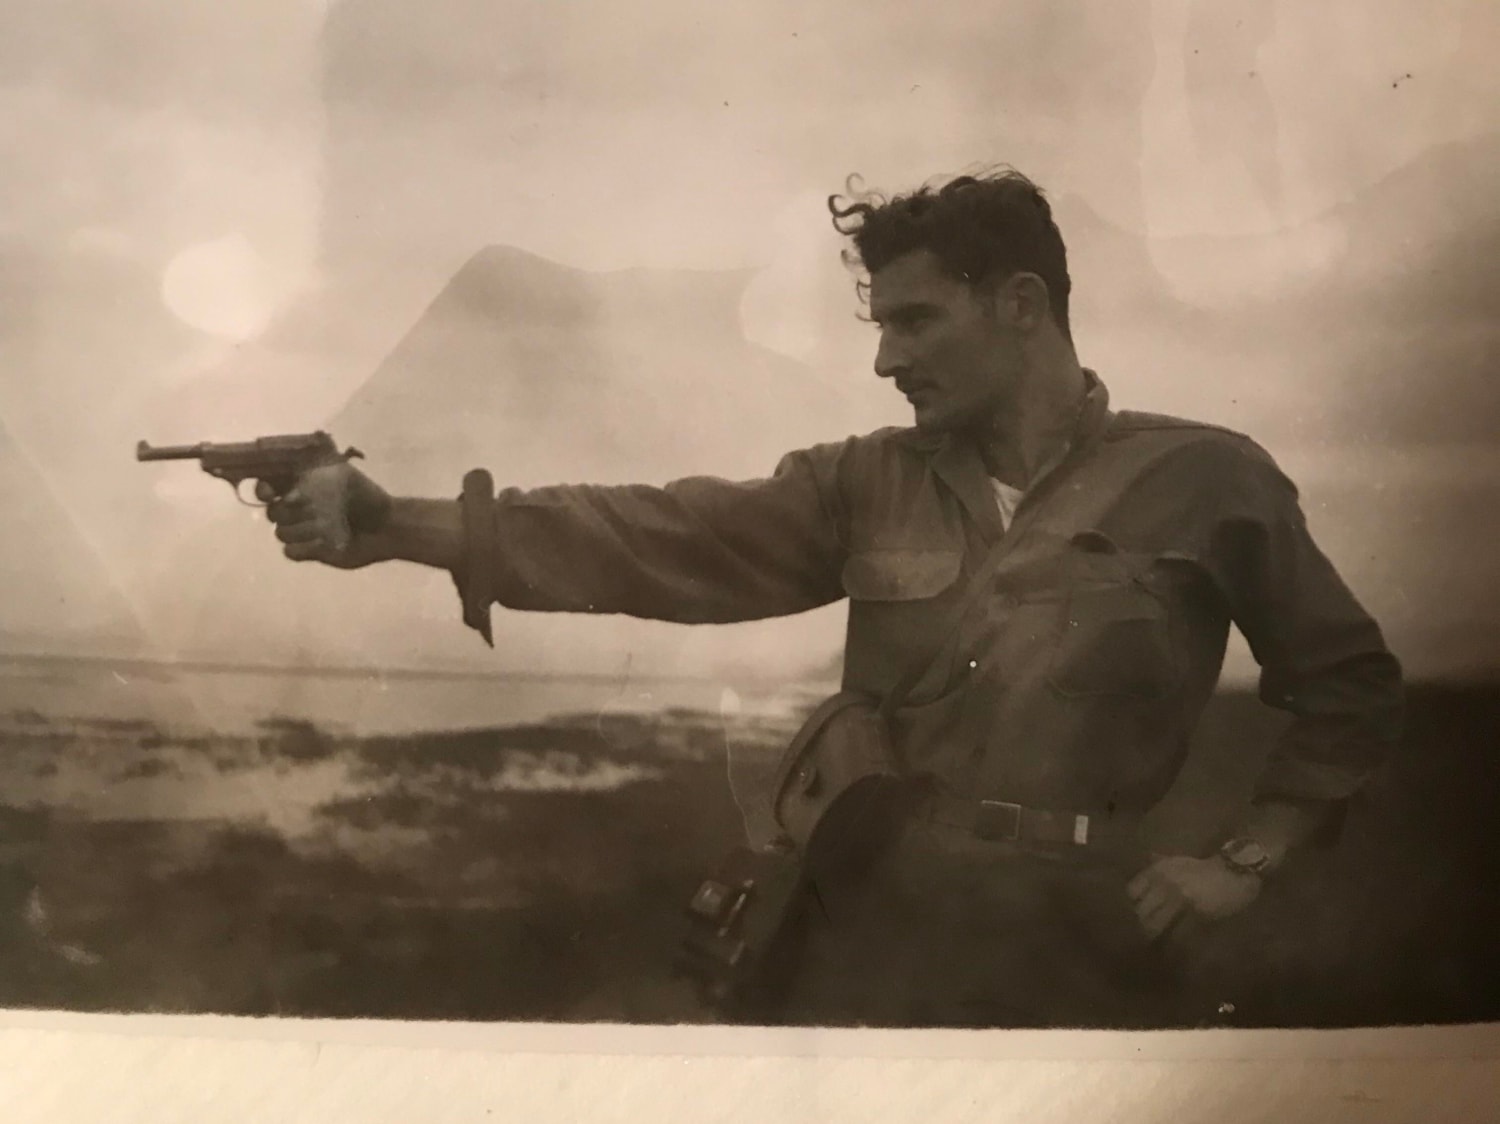 1947 - My rebel uncle in Indonesia